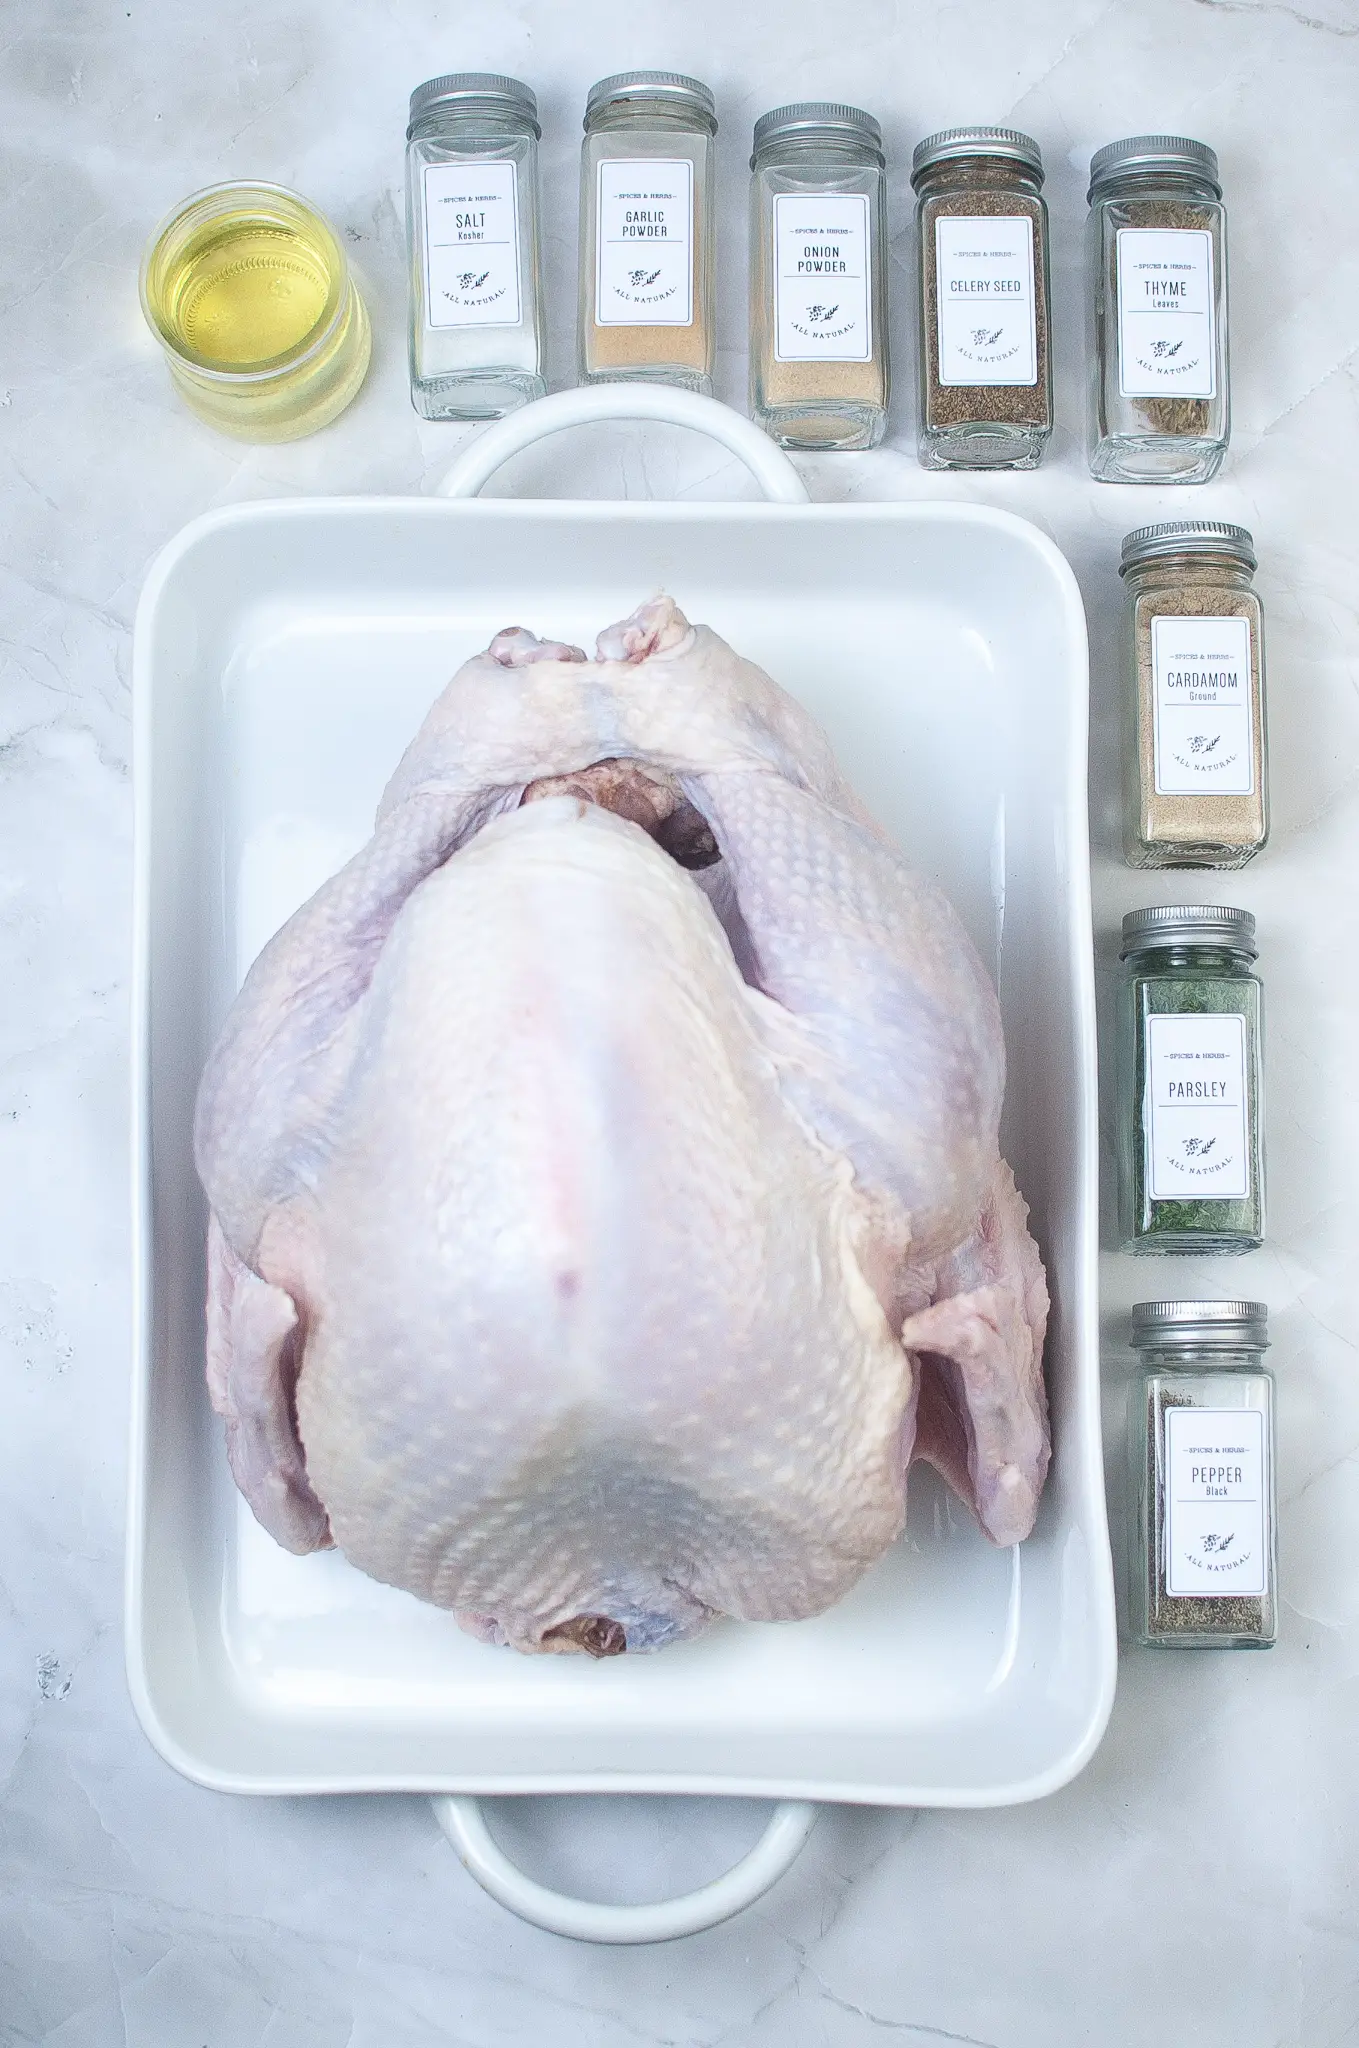 Ingredients for roasted turkey recipe.